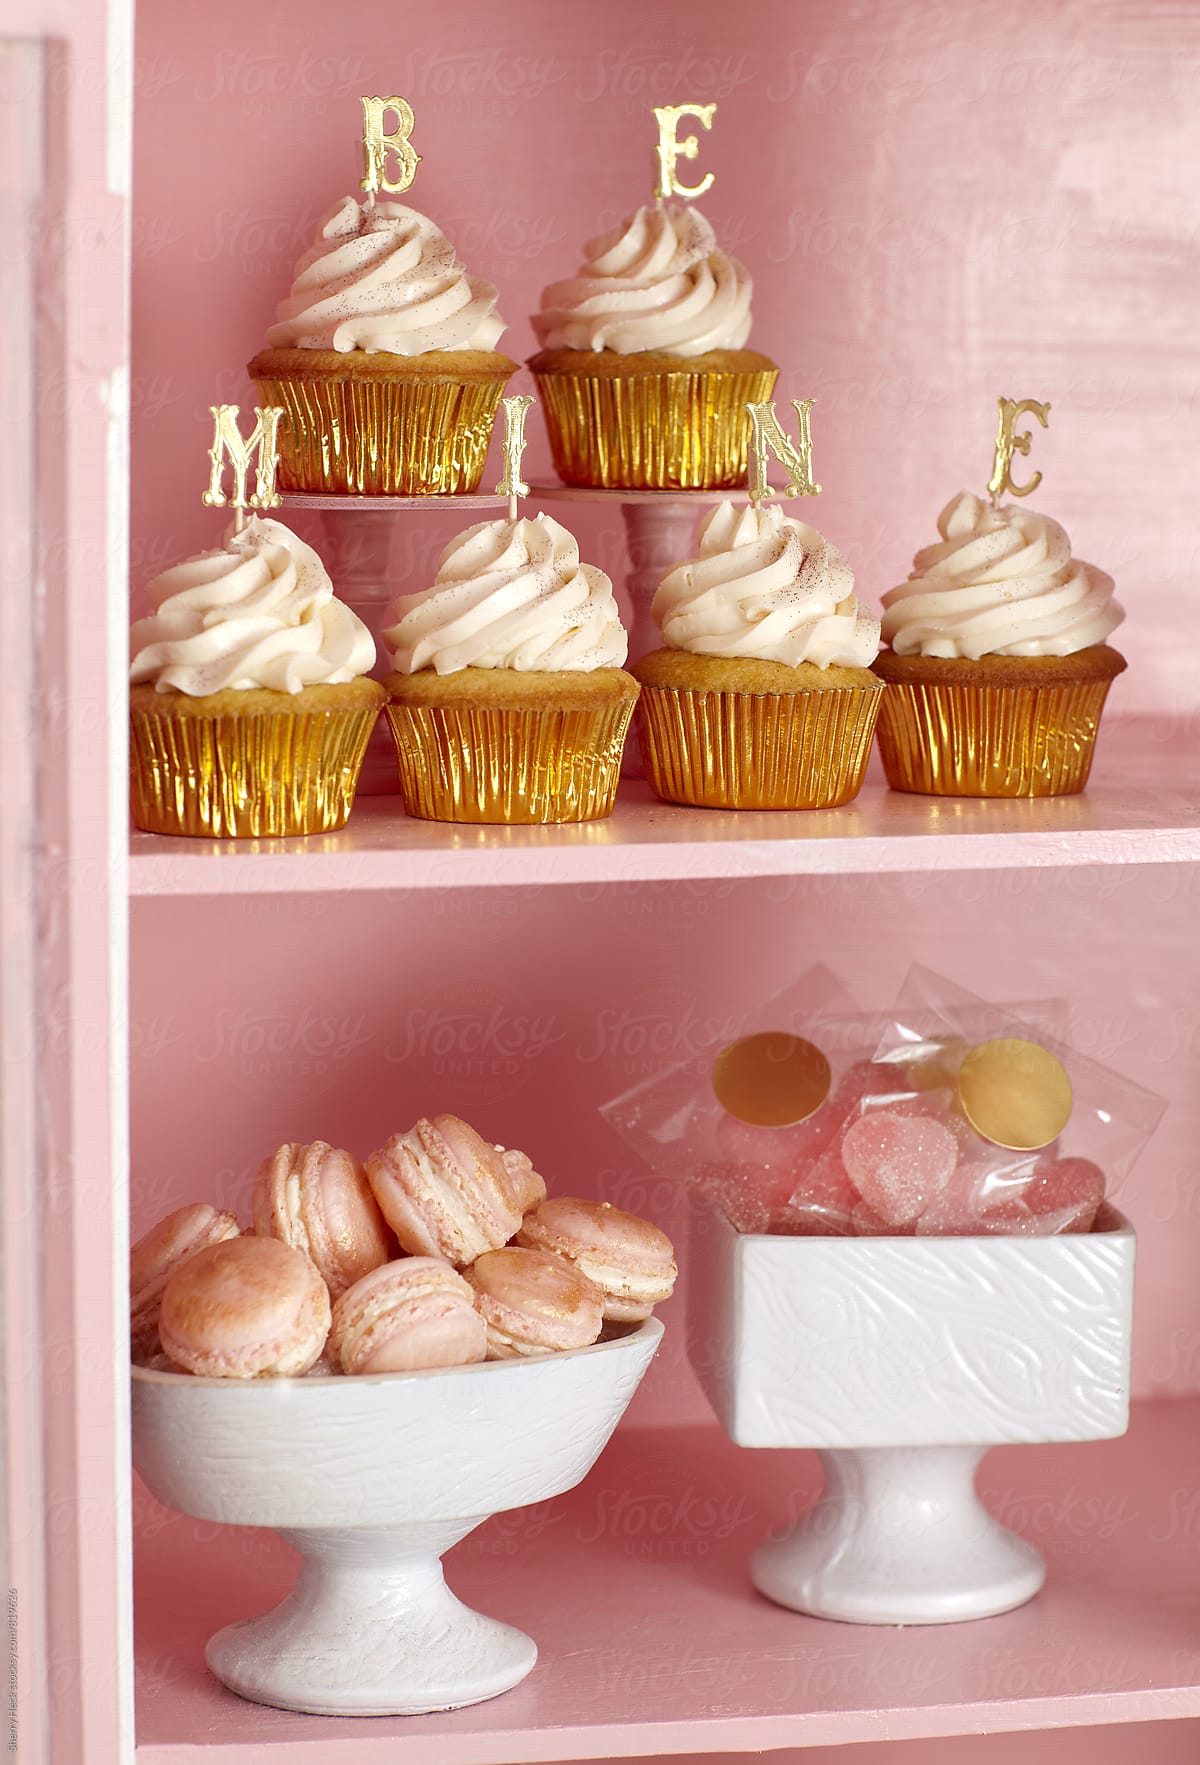 Be Mine gold letters on cupcakes in pink cabinet with macaroons and candy